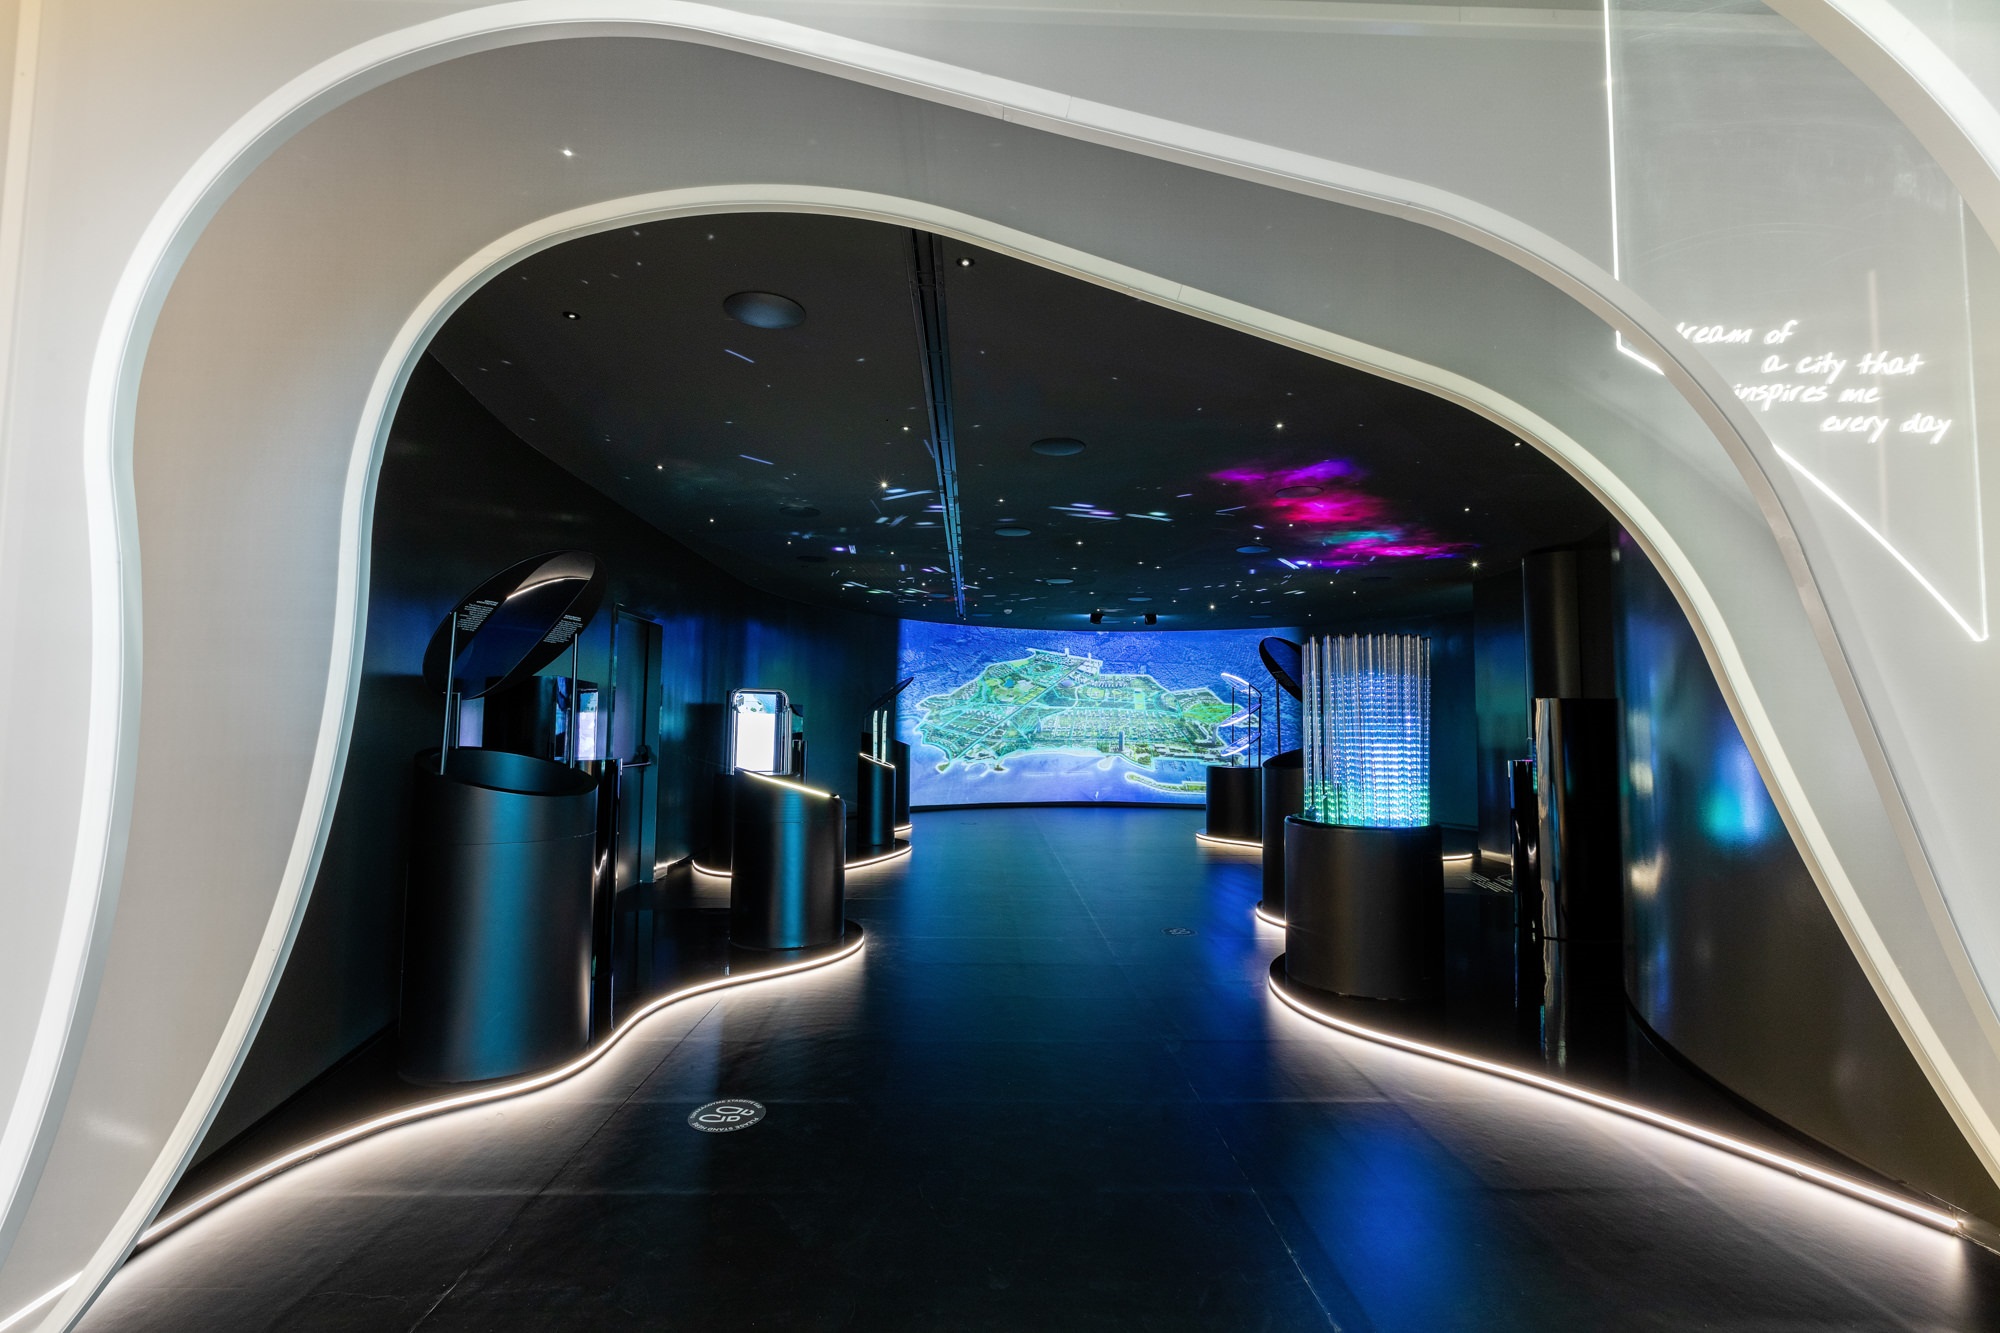 ONE OF EUROPE’S LARGEST URBAN REGENERATION PROJECTS, THE ELLINIKON EXPERIENCE CENTRE, IS HERALDED BY THE WORLD’S MOST STUNNING VISITOR CENTRE